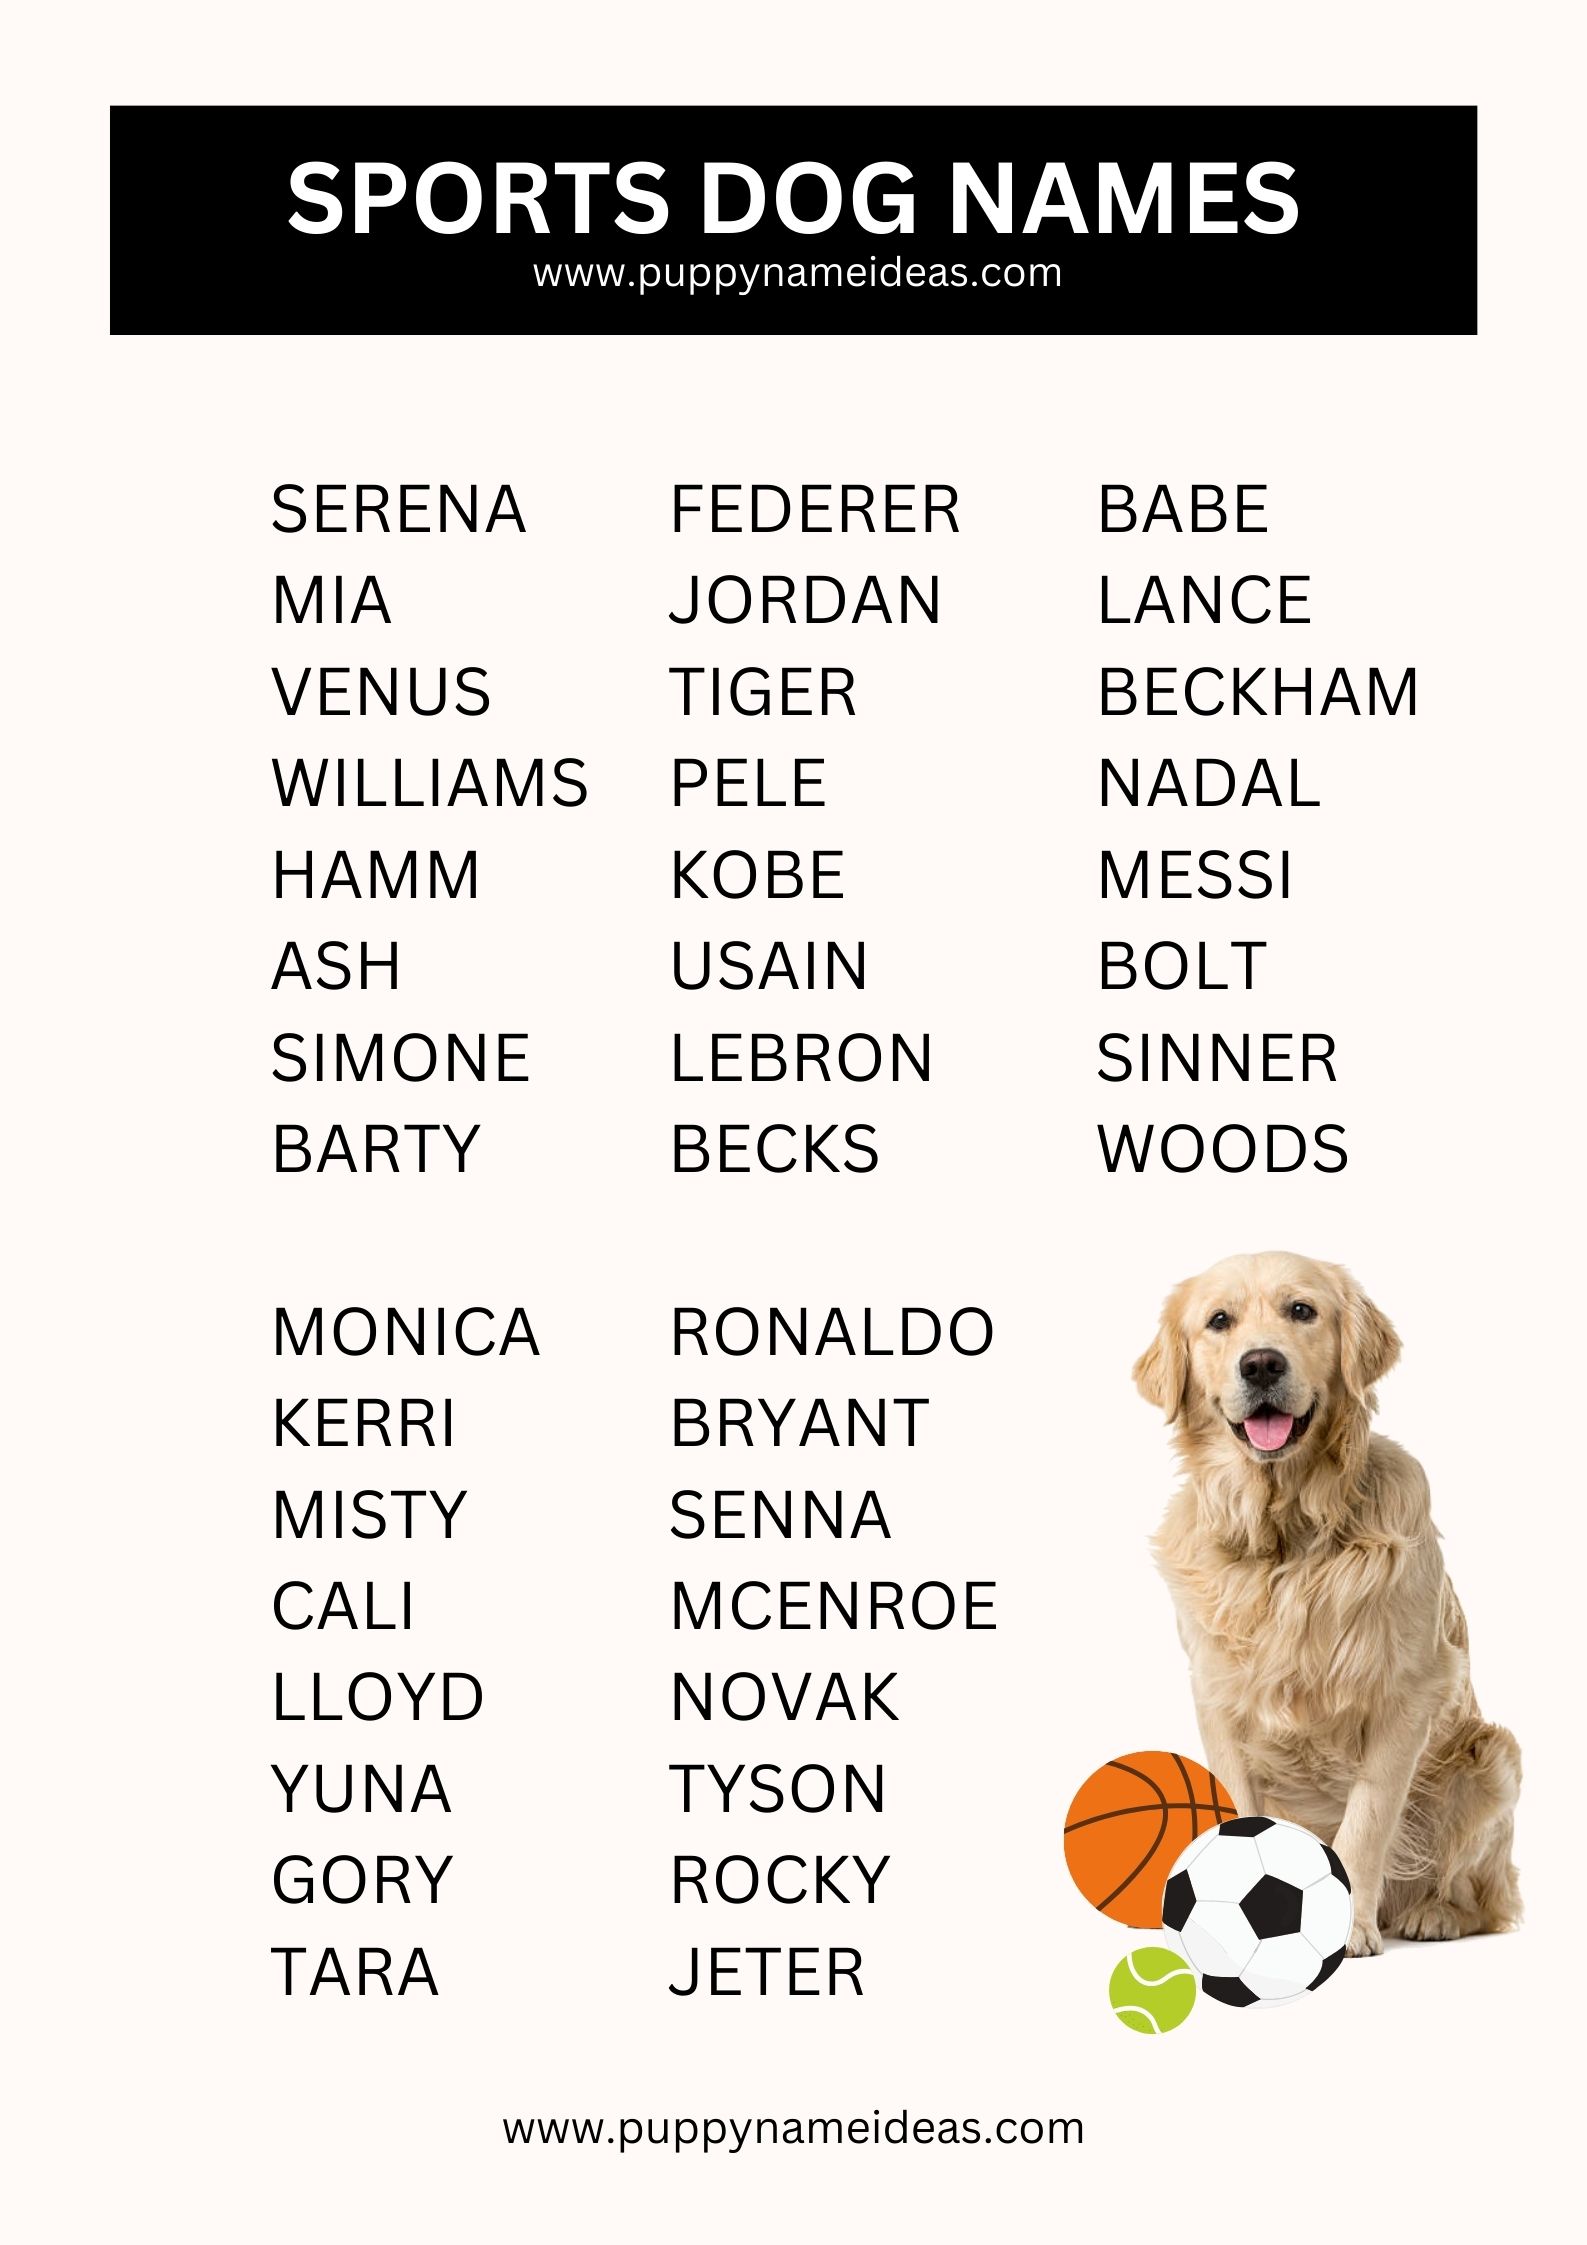 List Of Sports Dog Names